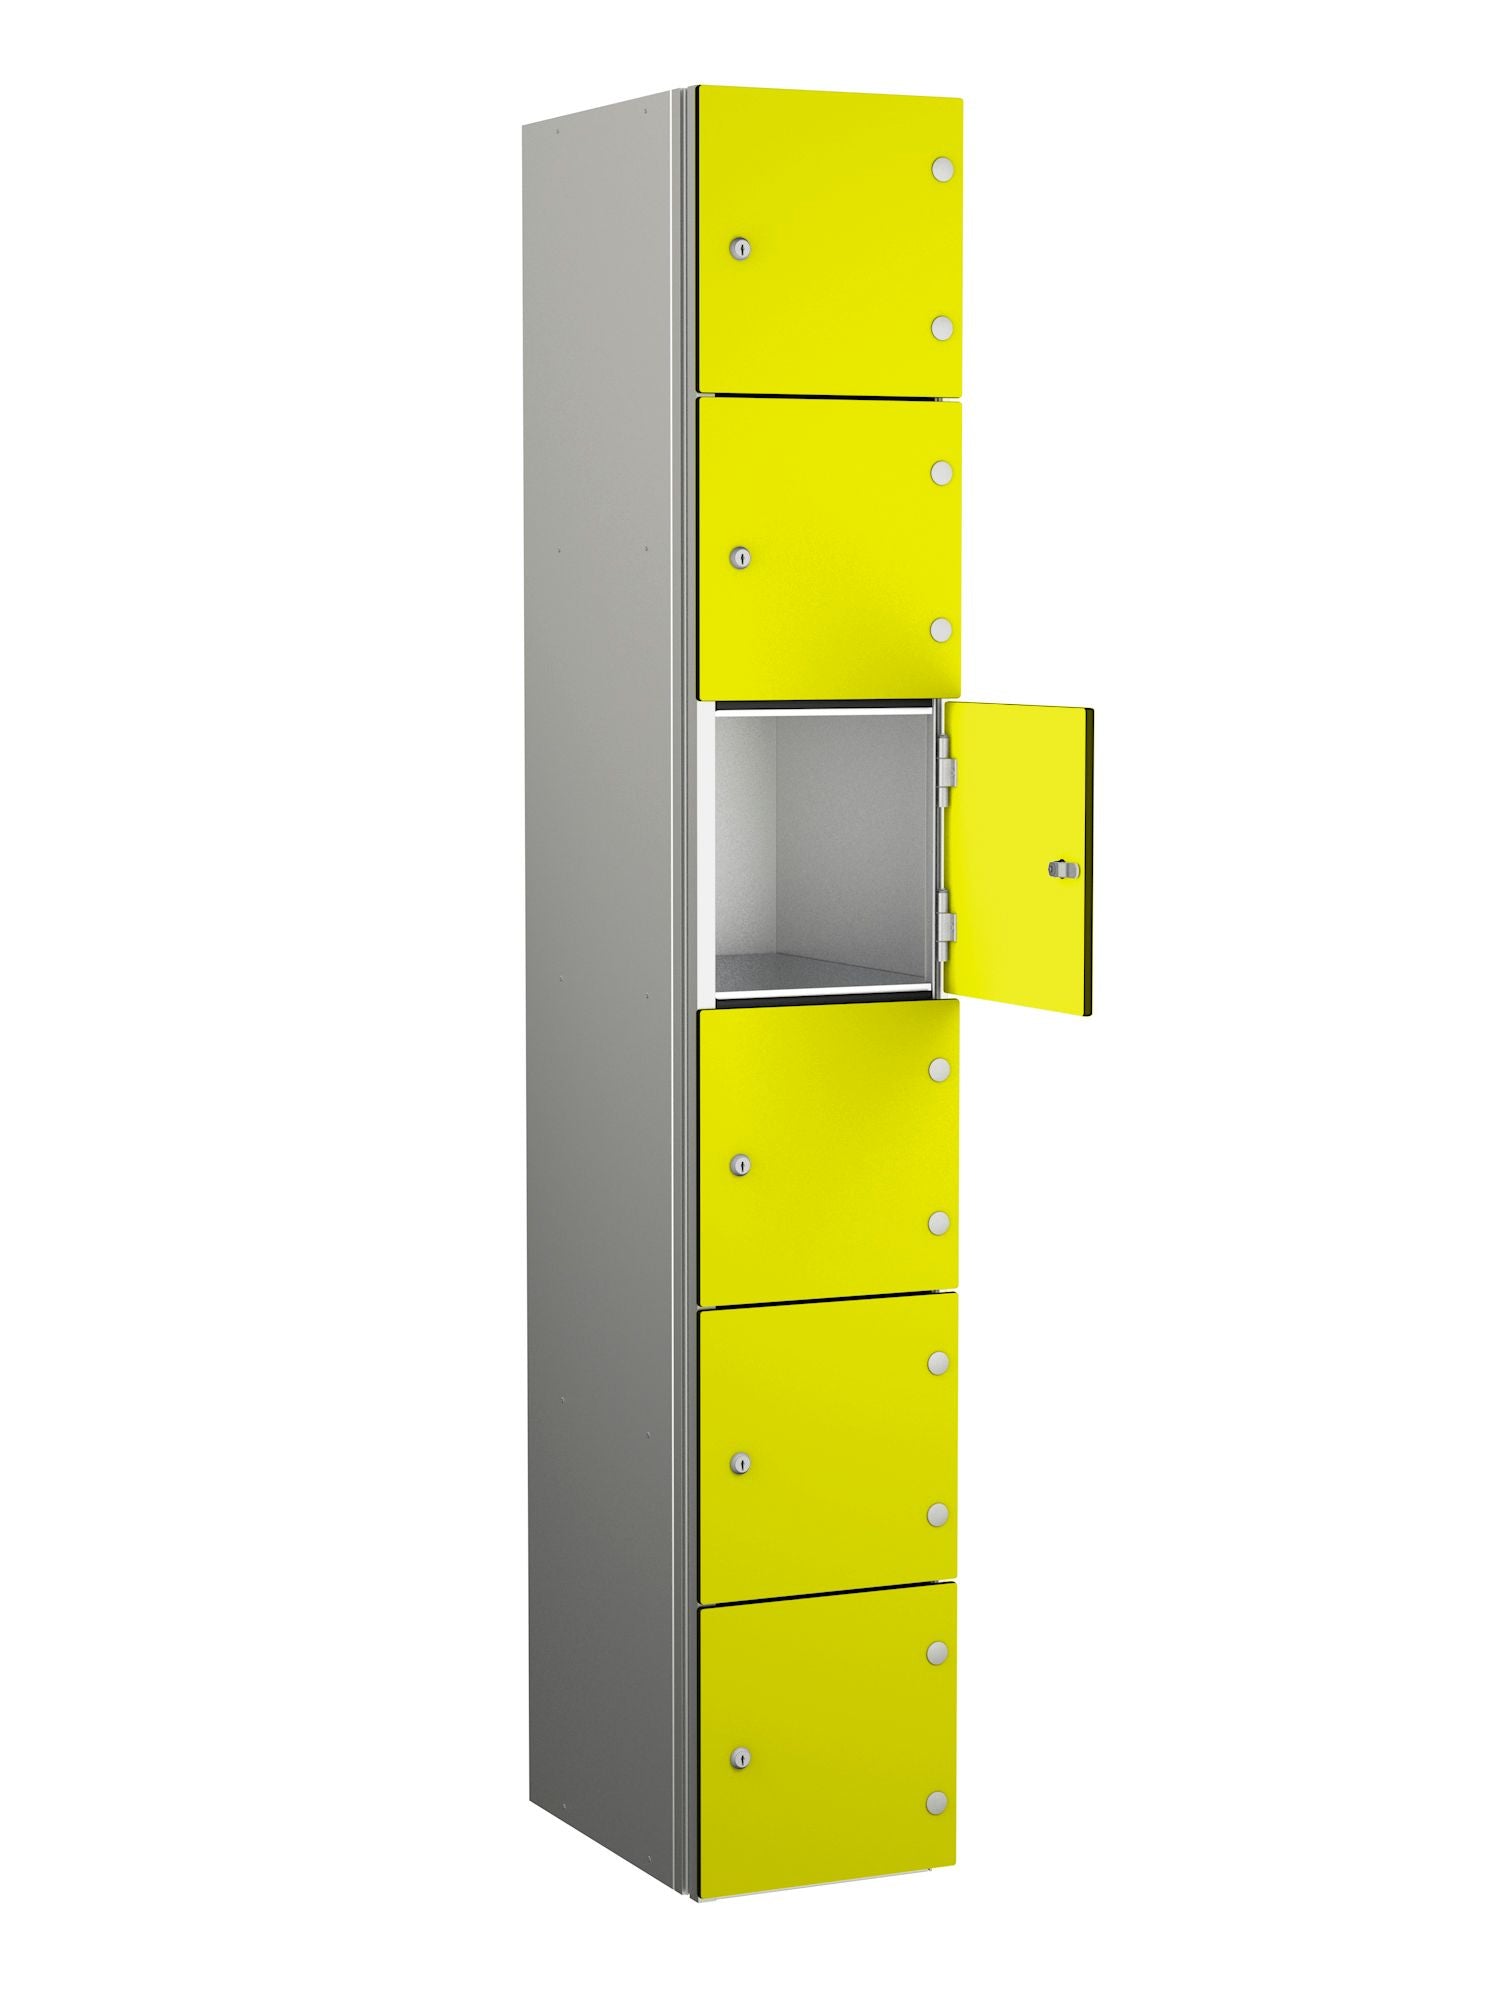 ZENBOX WET AREA LOCKERS WITH SGL DOORS - LIME YELLOW 6 DOOR Storage Lockers > Lockers > Cabinets > Storage > Probe > One Stop For Safety   